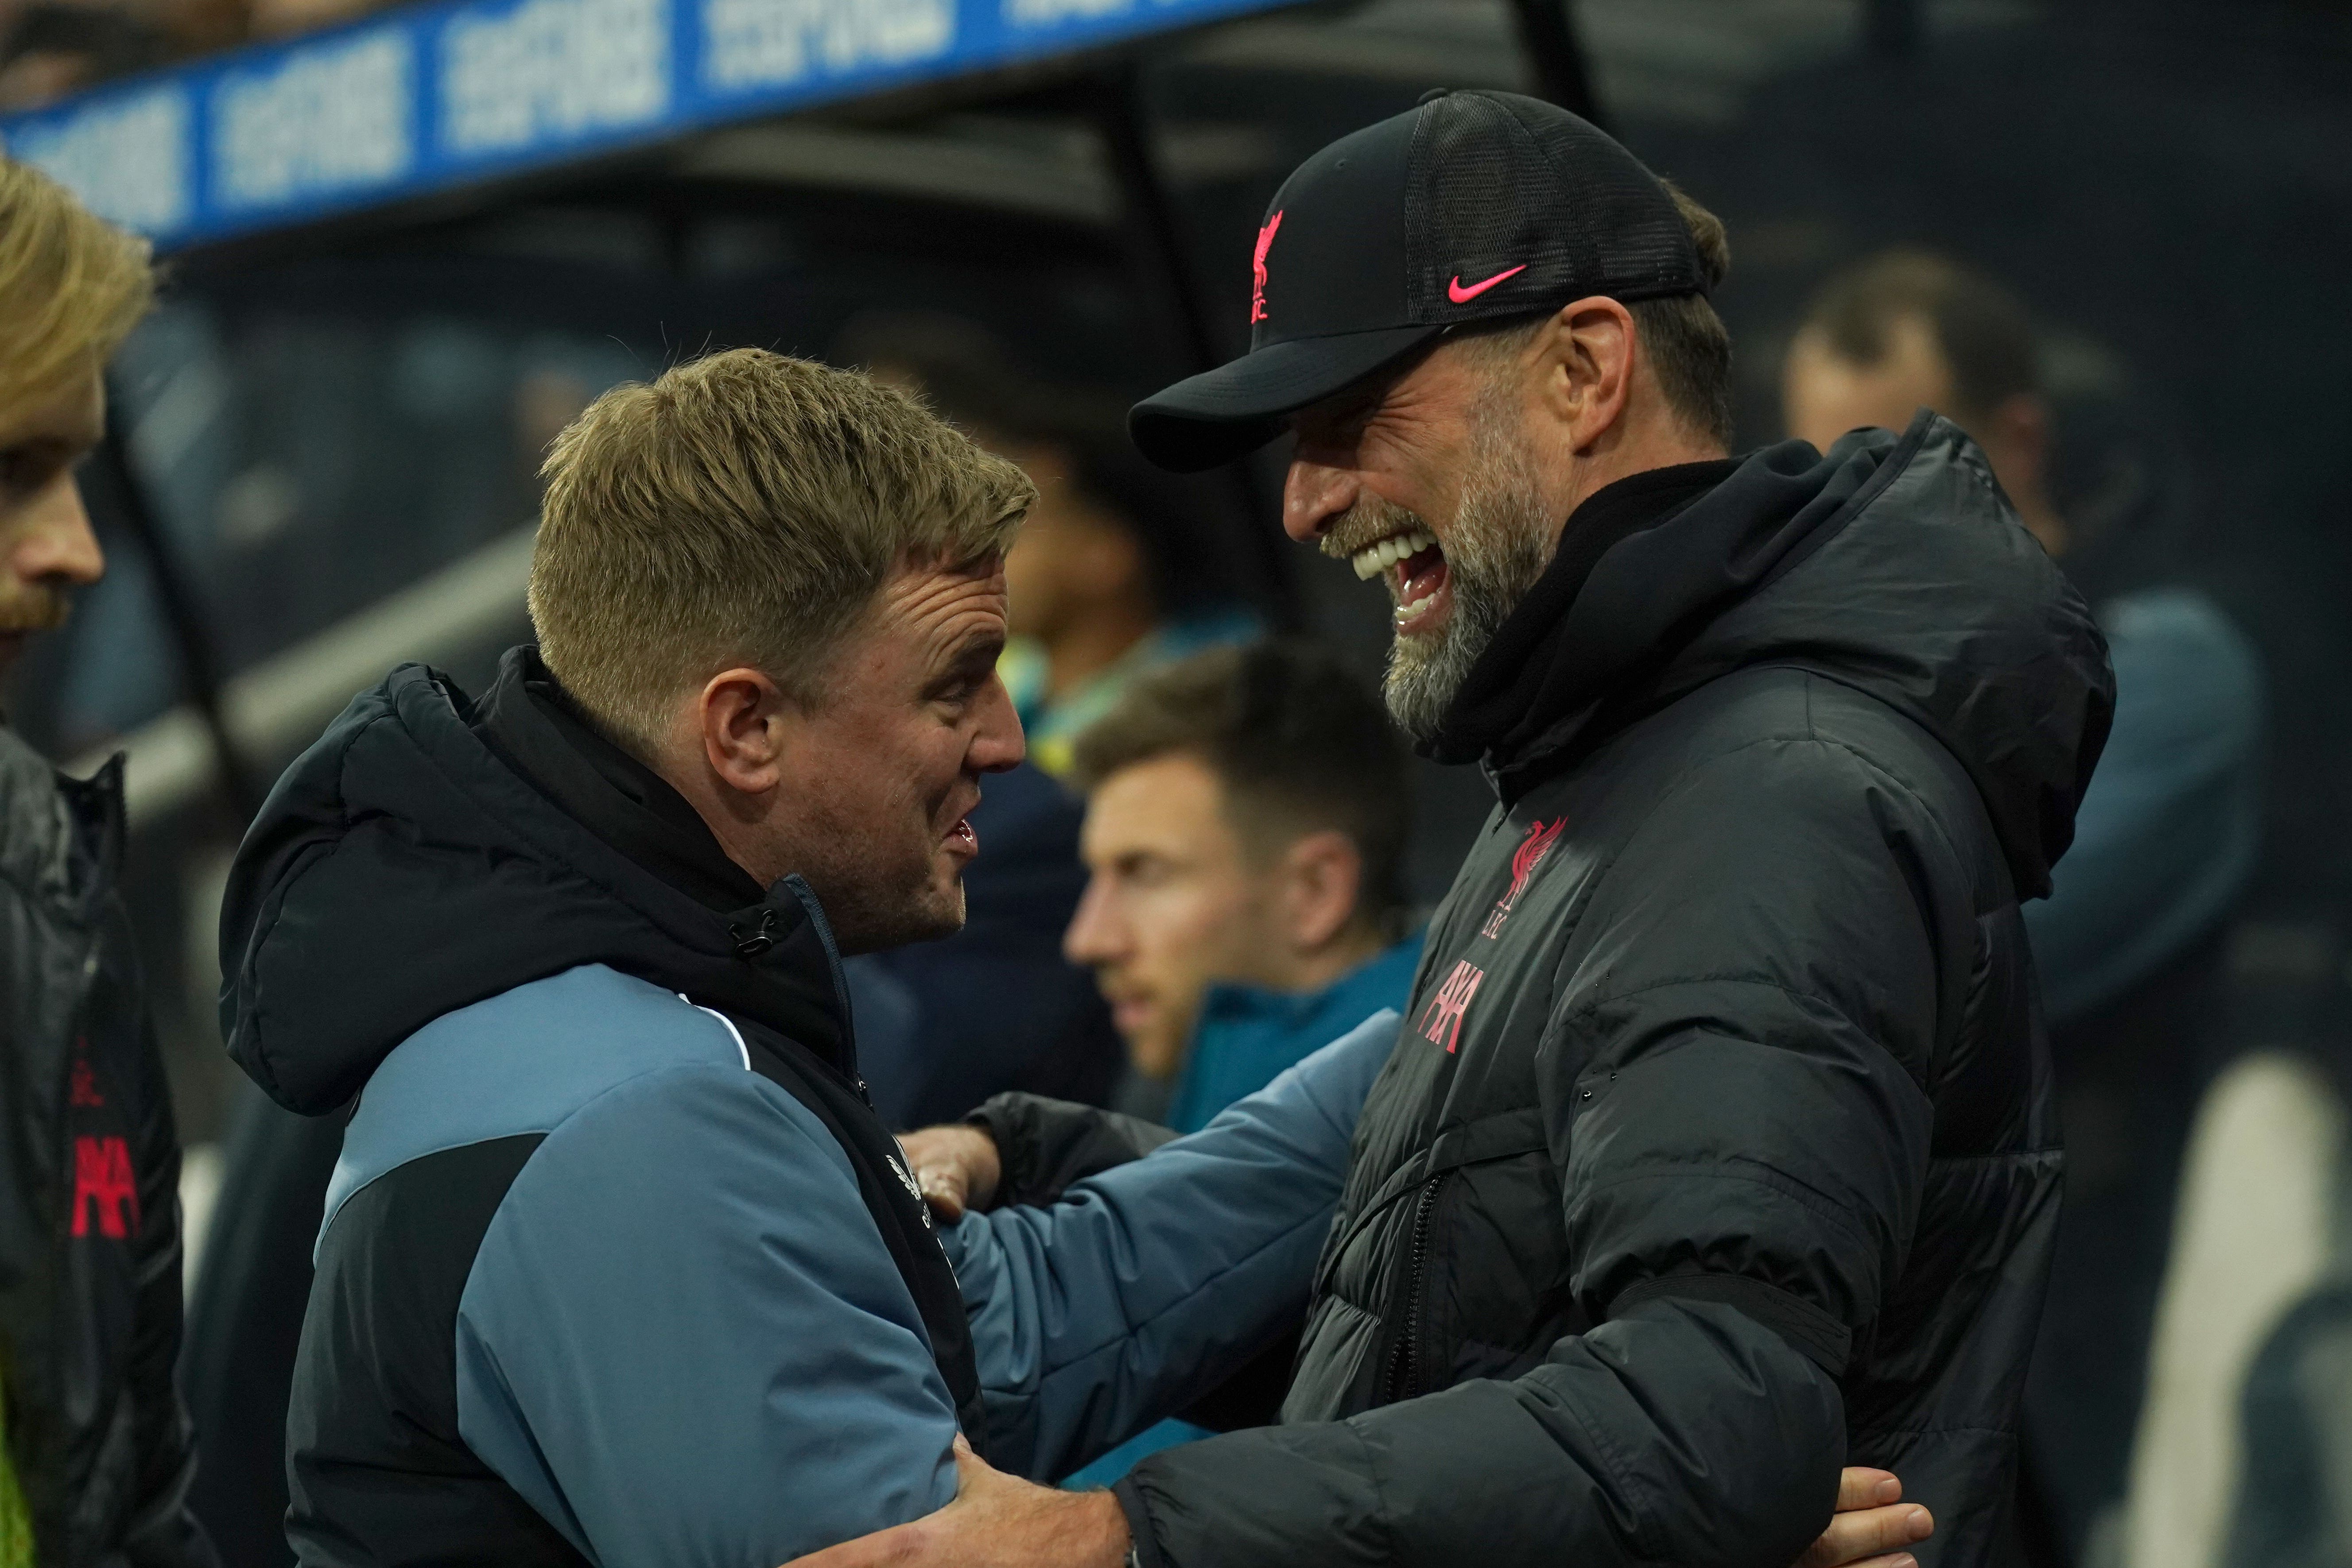 Eddie Howe had limited bench options during the loss to Liverpool, whereas Jurgen Klopp could make game-changing switches